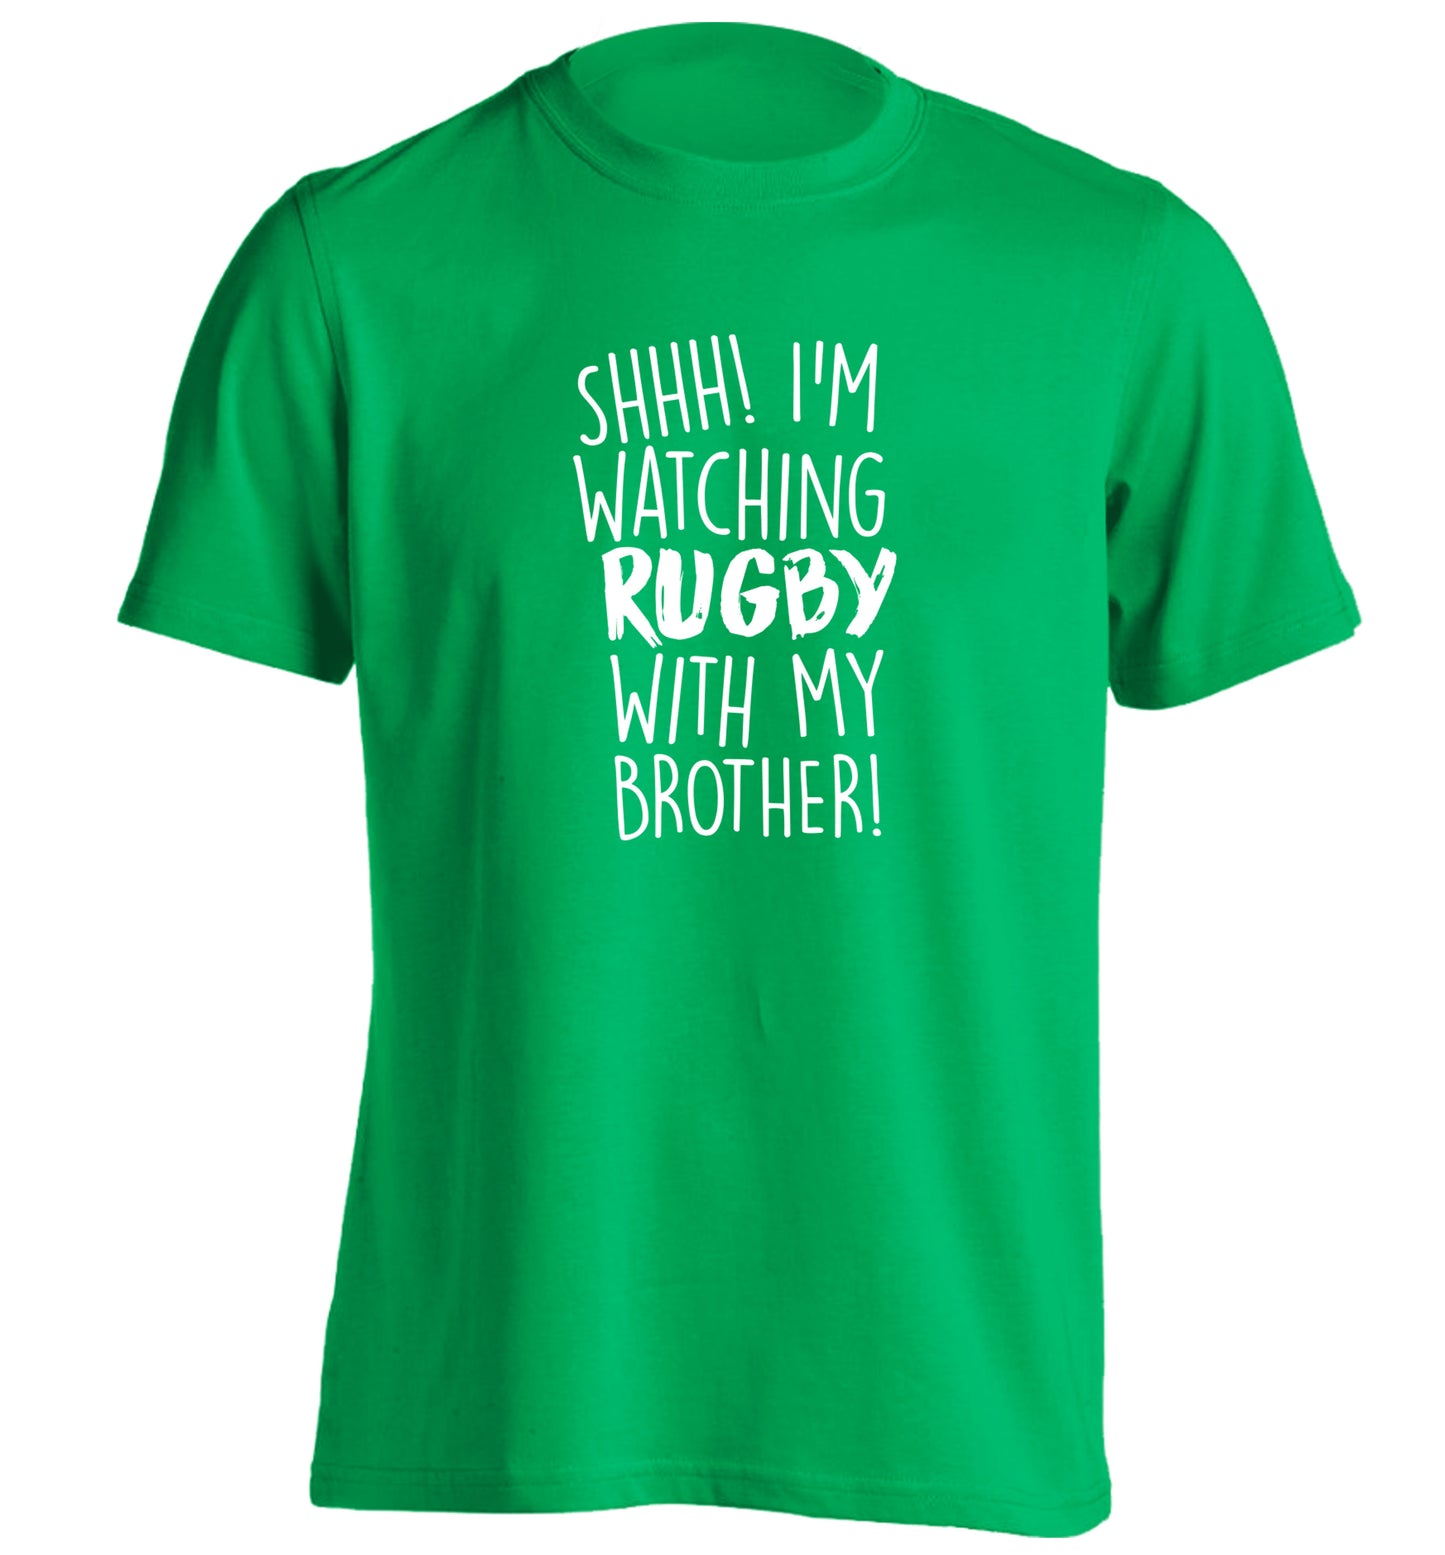 Shh... I'm watching rugby with my brother adults unisex green Tshirt 2XL